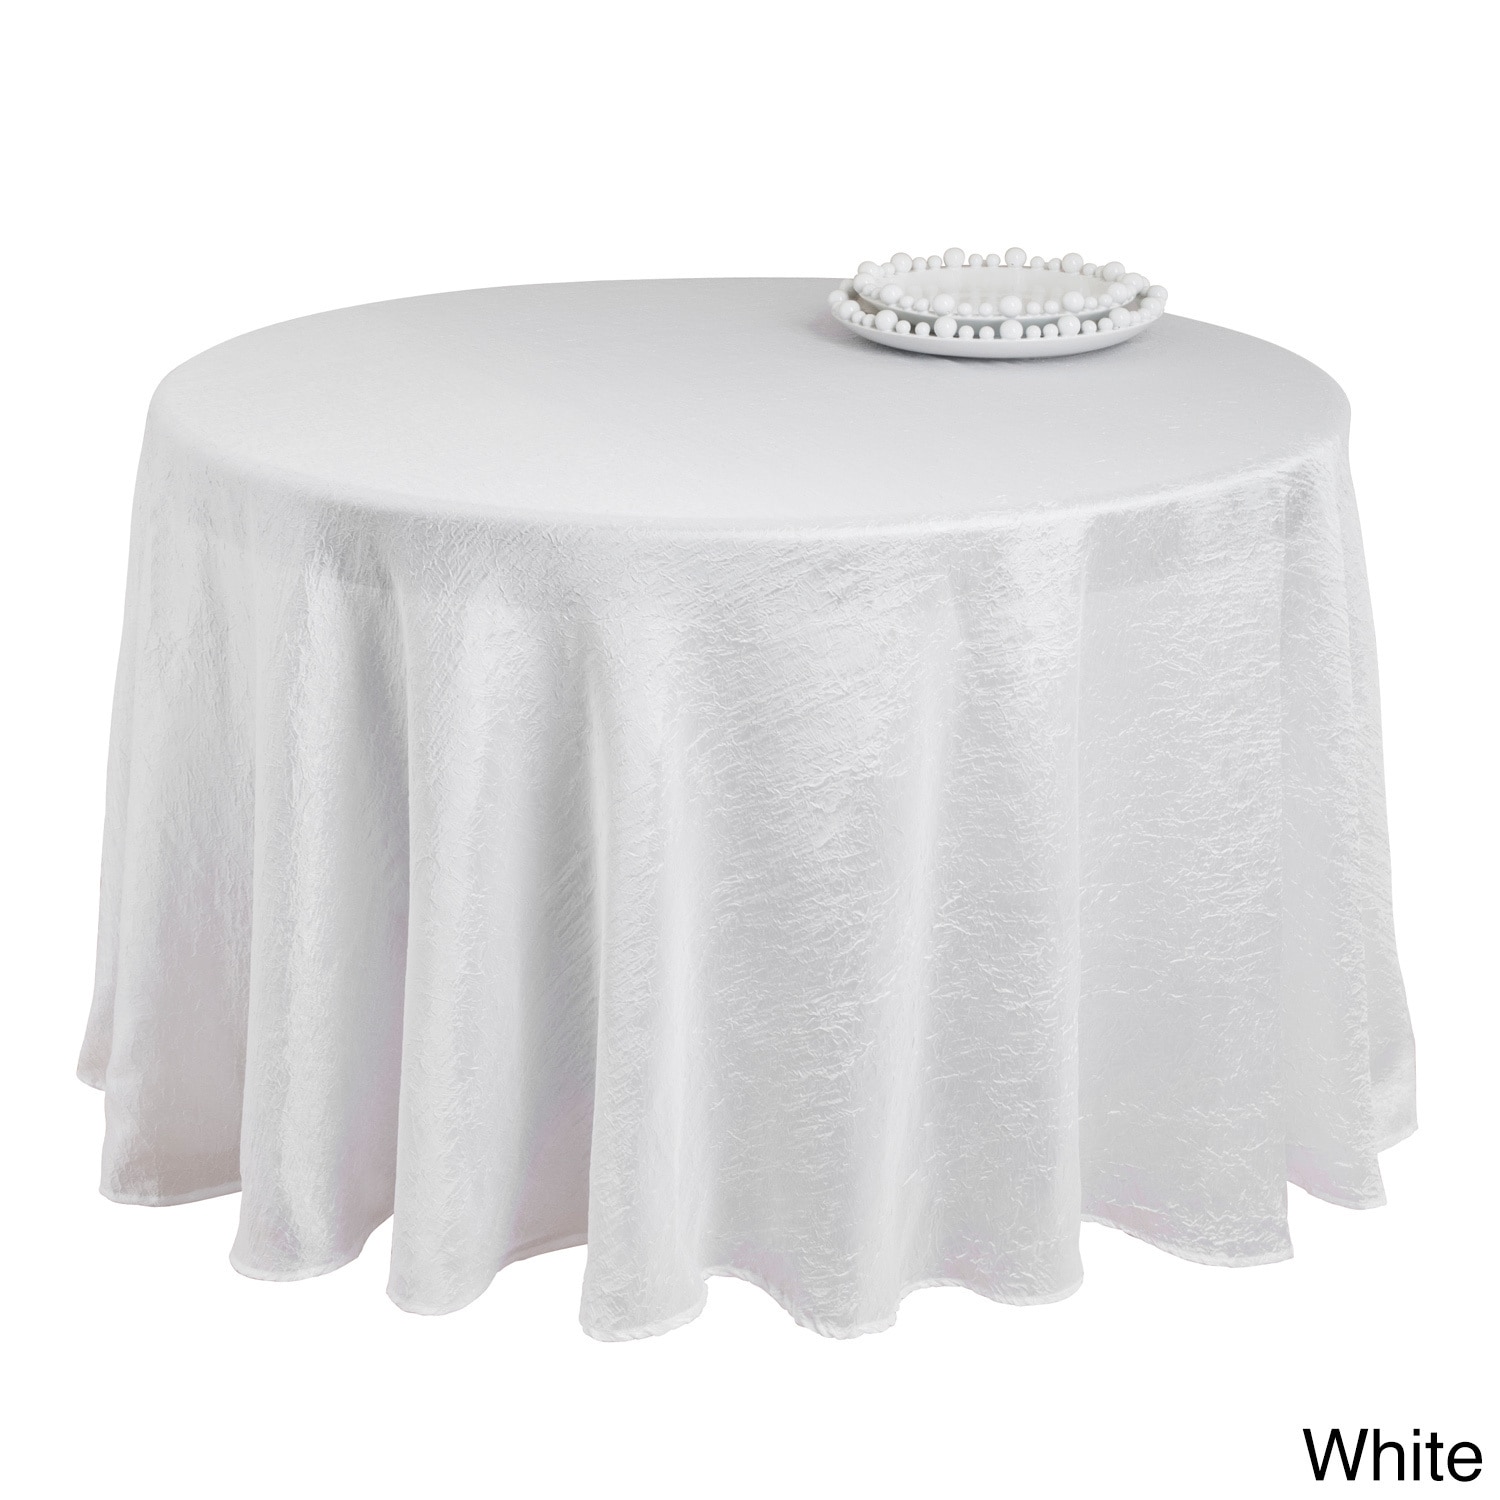 white fabric tablecloth